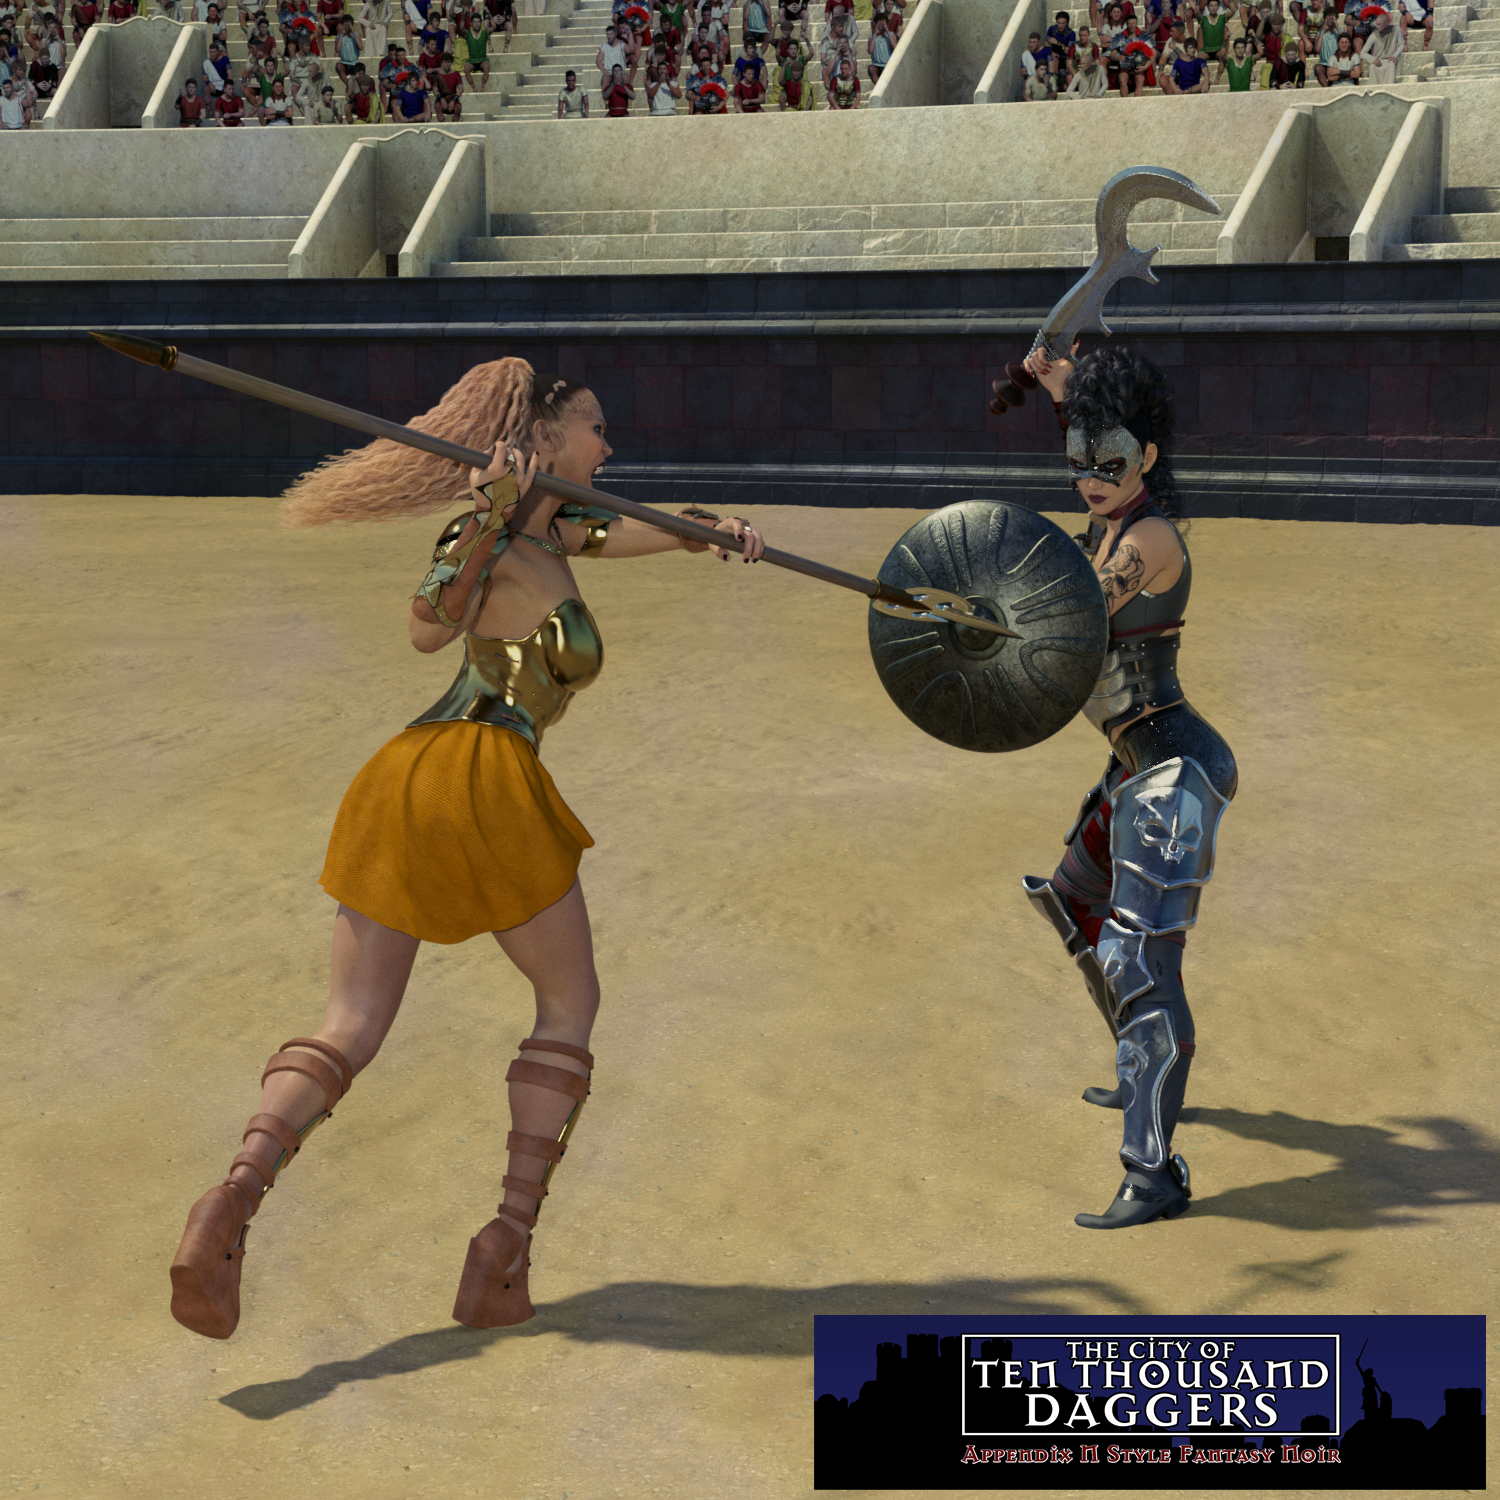 Two gladiators fight in the Grand Arena